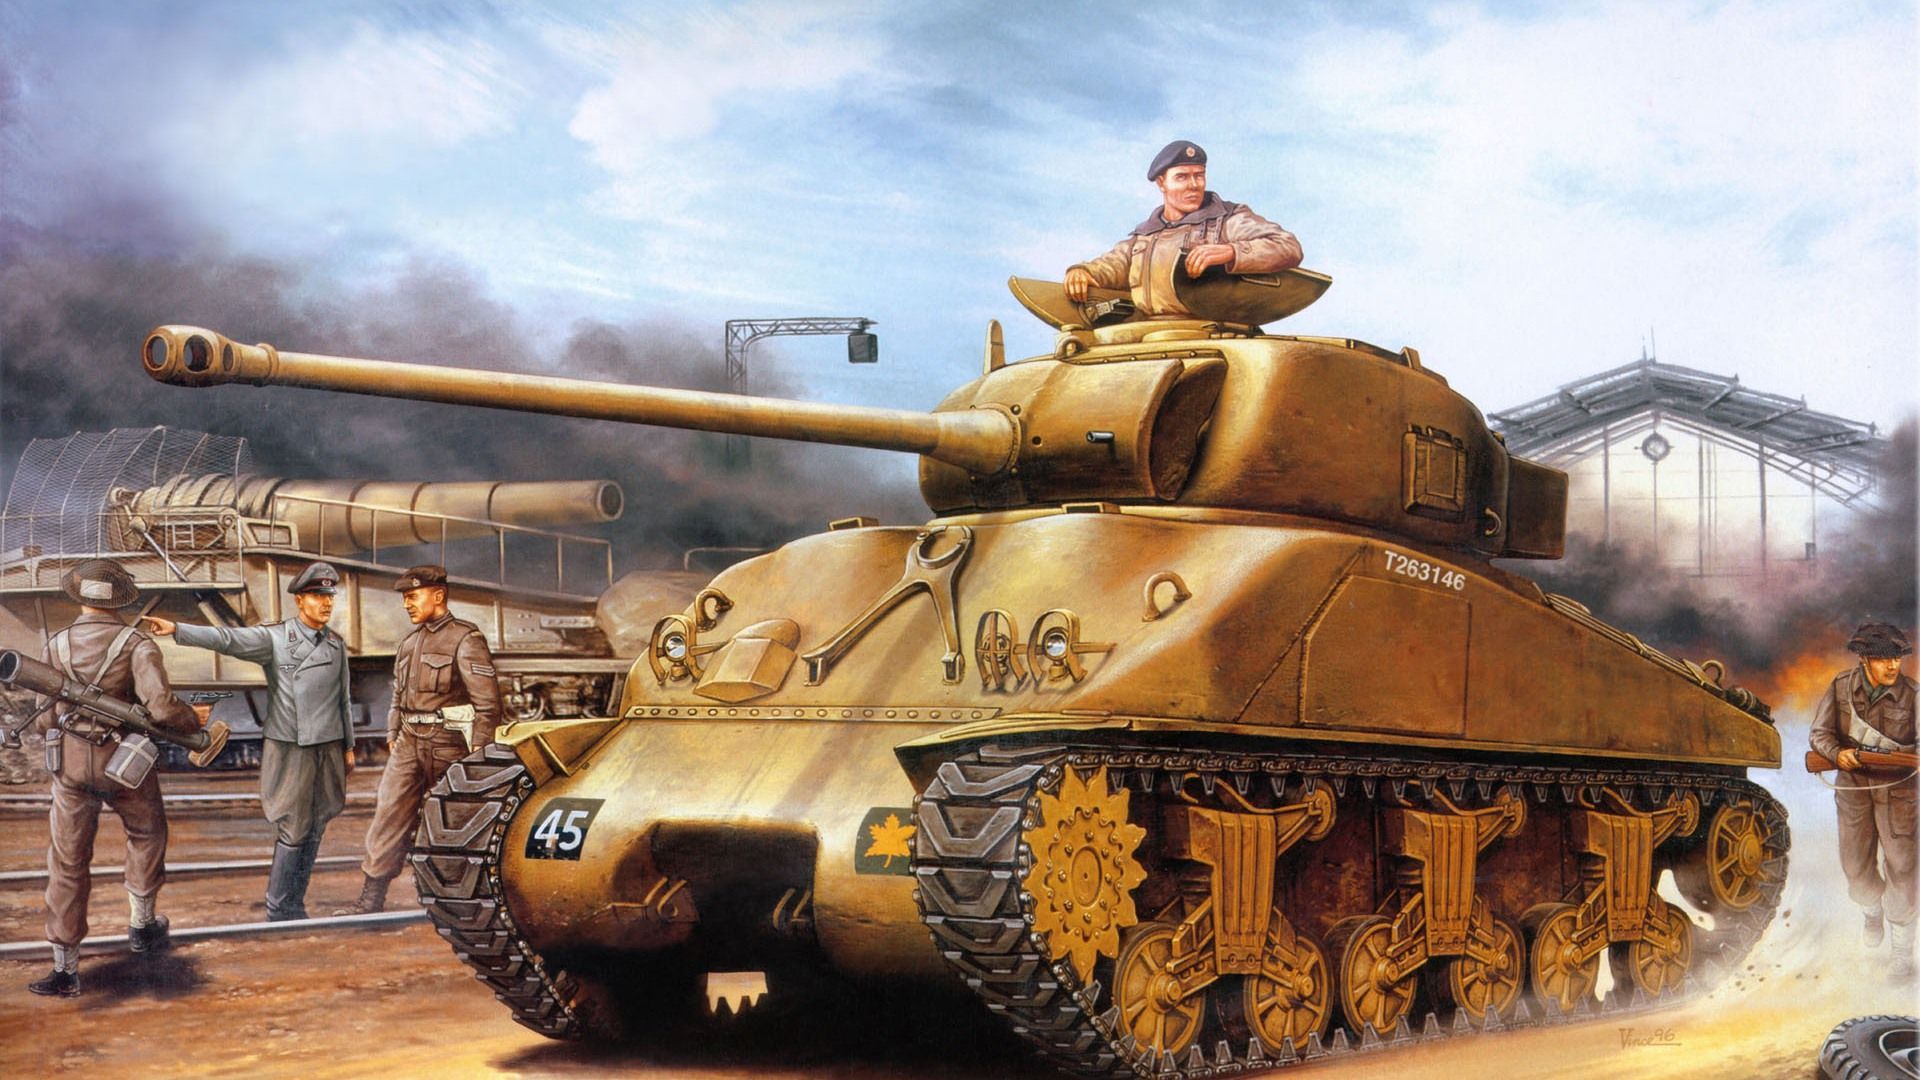 Military tanks, armored HD painting wallpaper. Tanks military, Military, Wwii vehicles